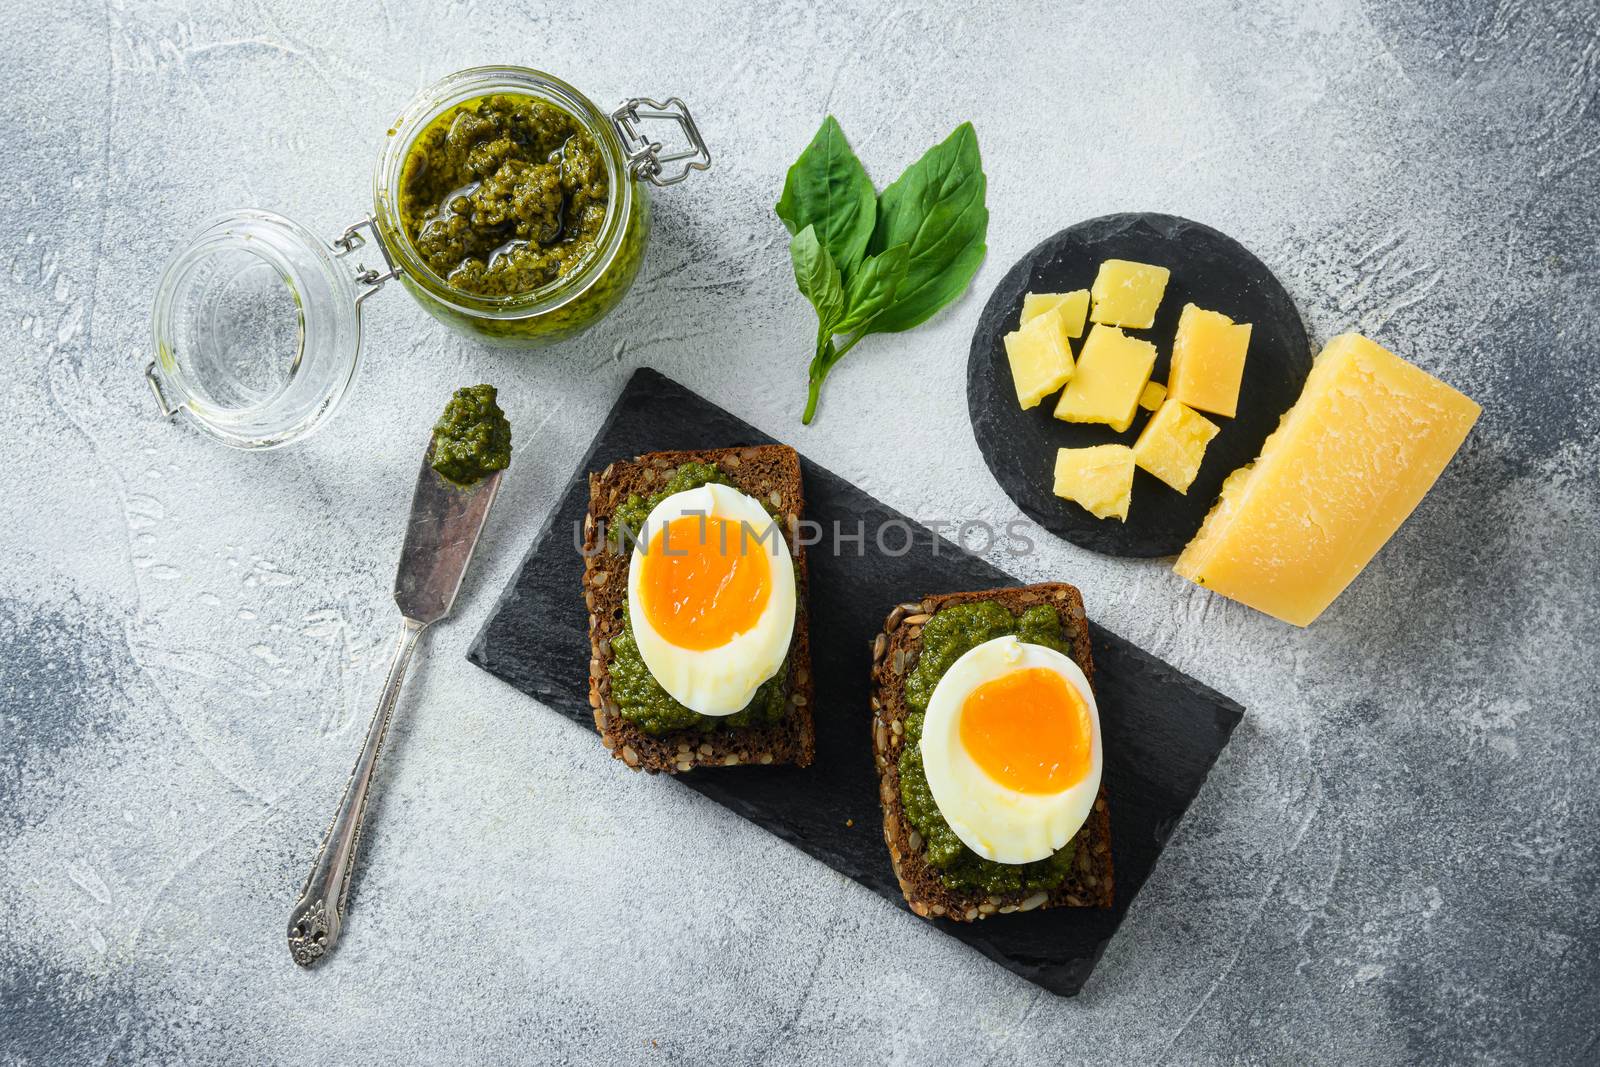 homemade eggs panini bread with Green basil pesto silver spoon on italian breakfast with ingredients green pesto on grey and white concrete table surface top view .